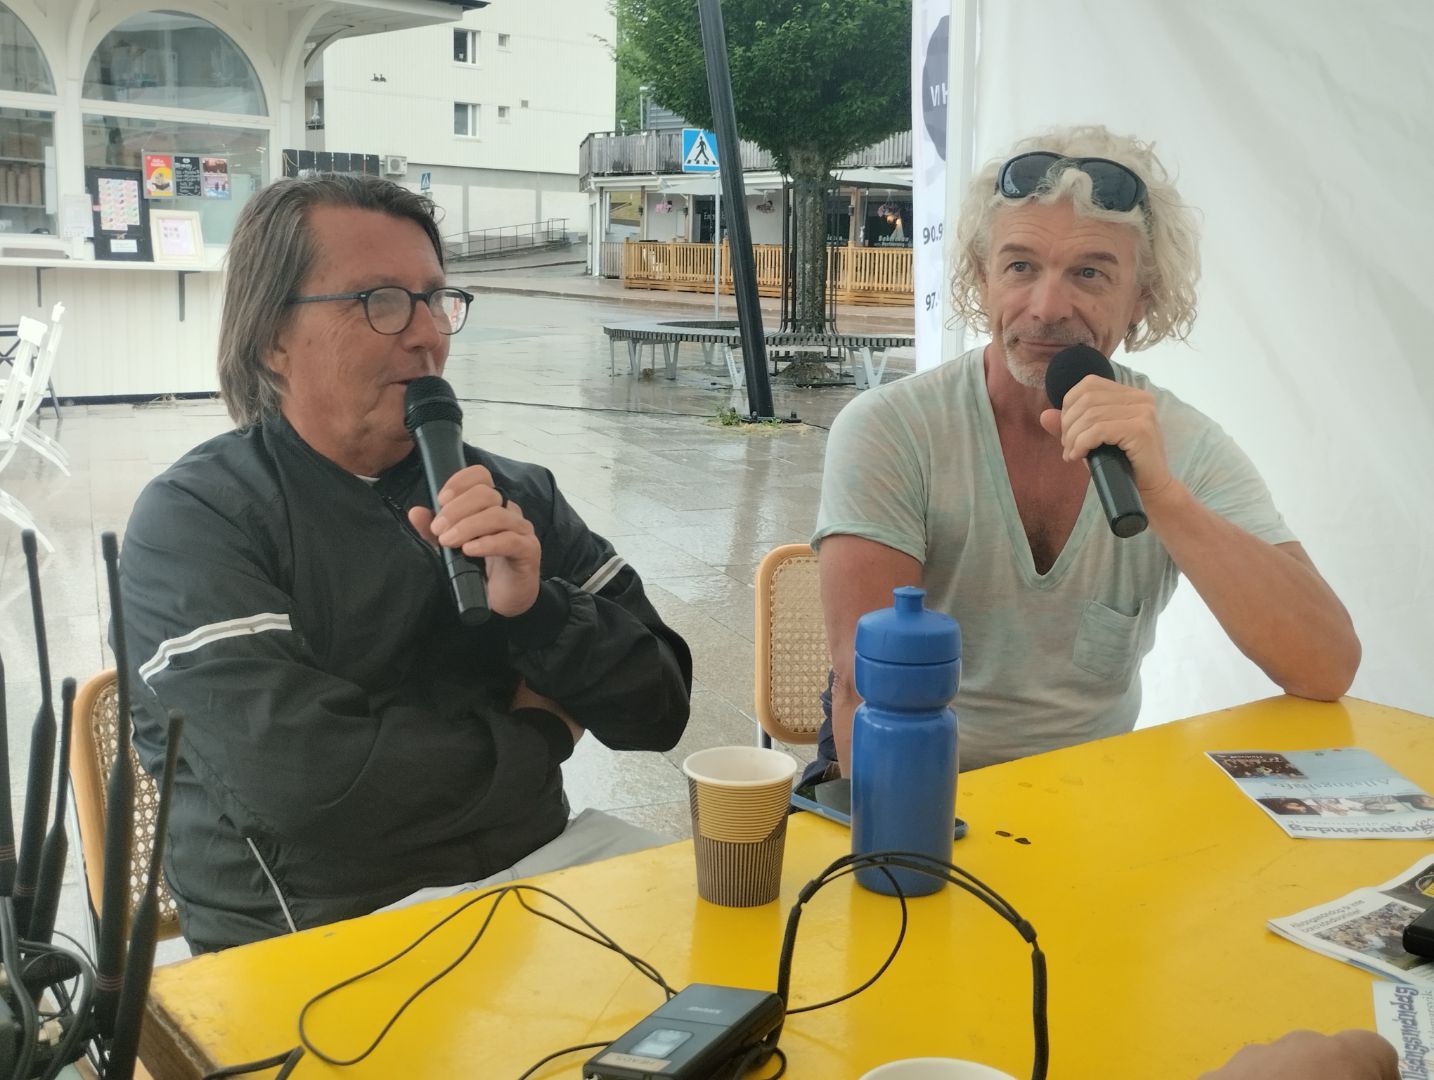 Bosse Brännerud and Peter Malmberg from Stig Helmers live in RadioWix.